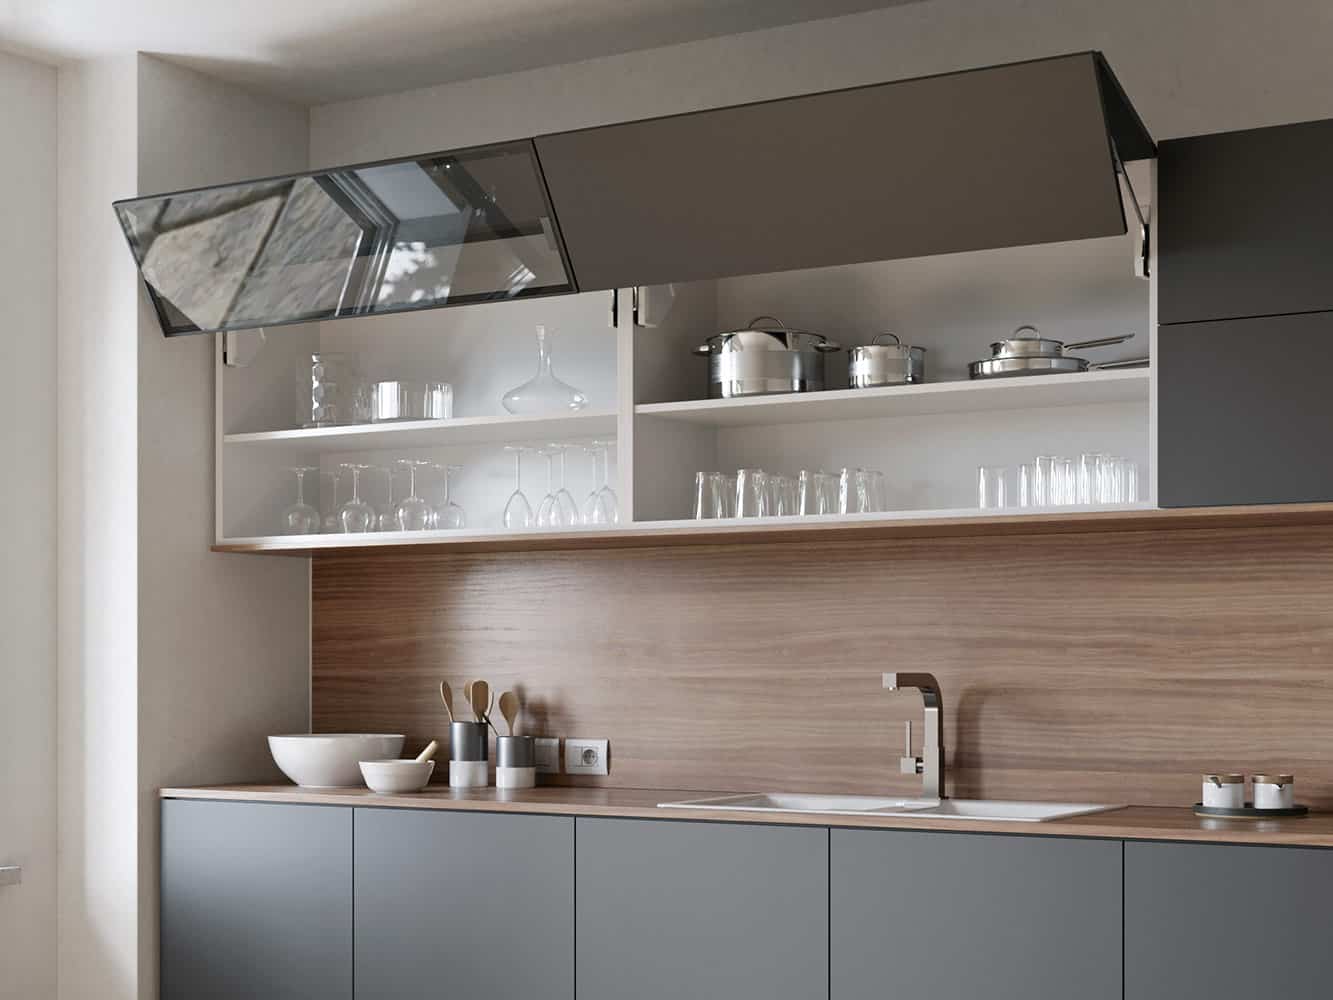 A black-colored fully-functional lift-up wall units of wall cabinetry displaying some crockery.